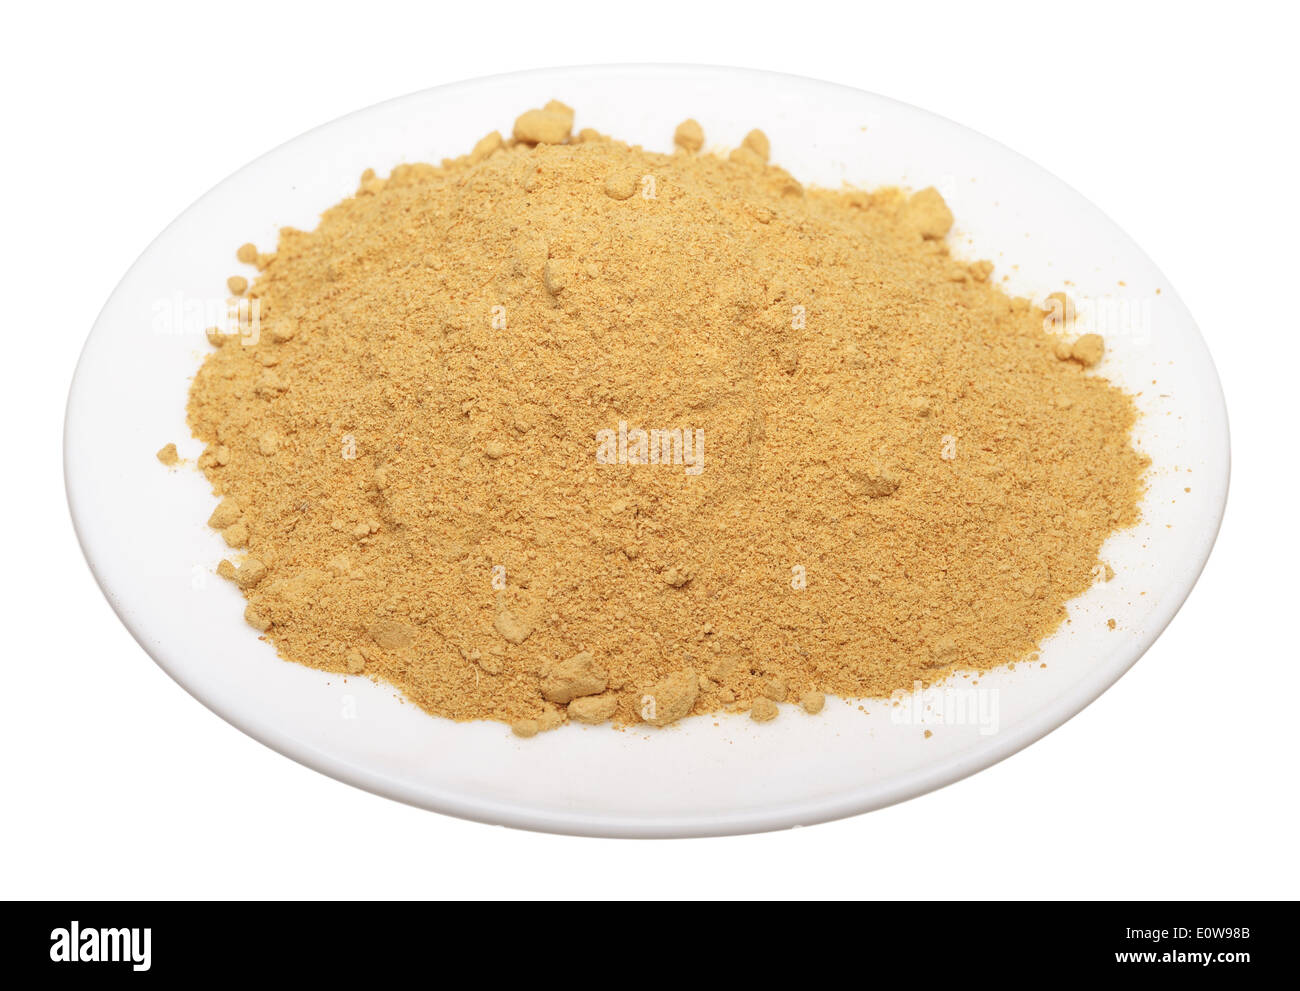 Ground ginger on a white background, isolated Stock Photo